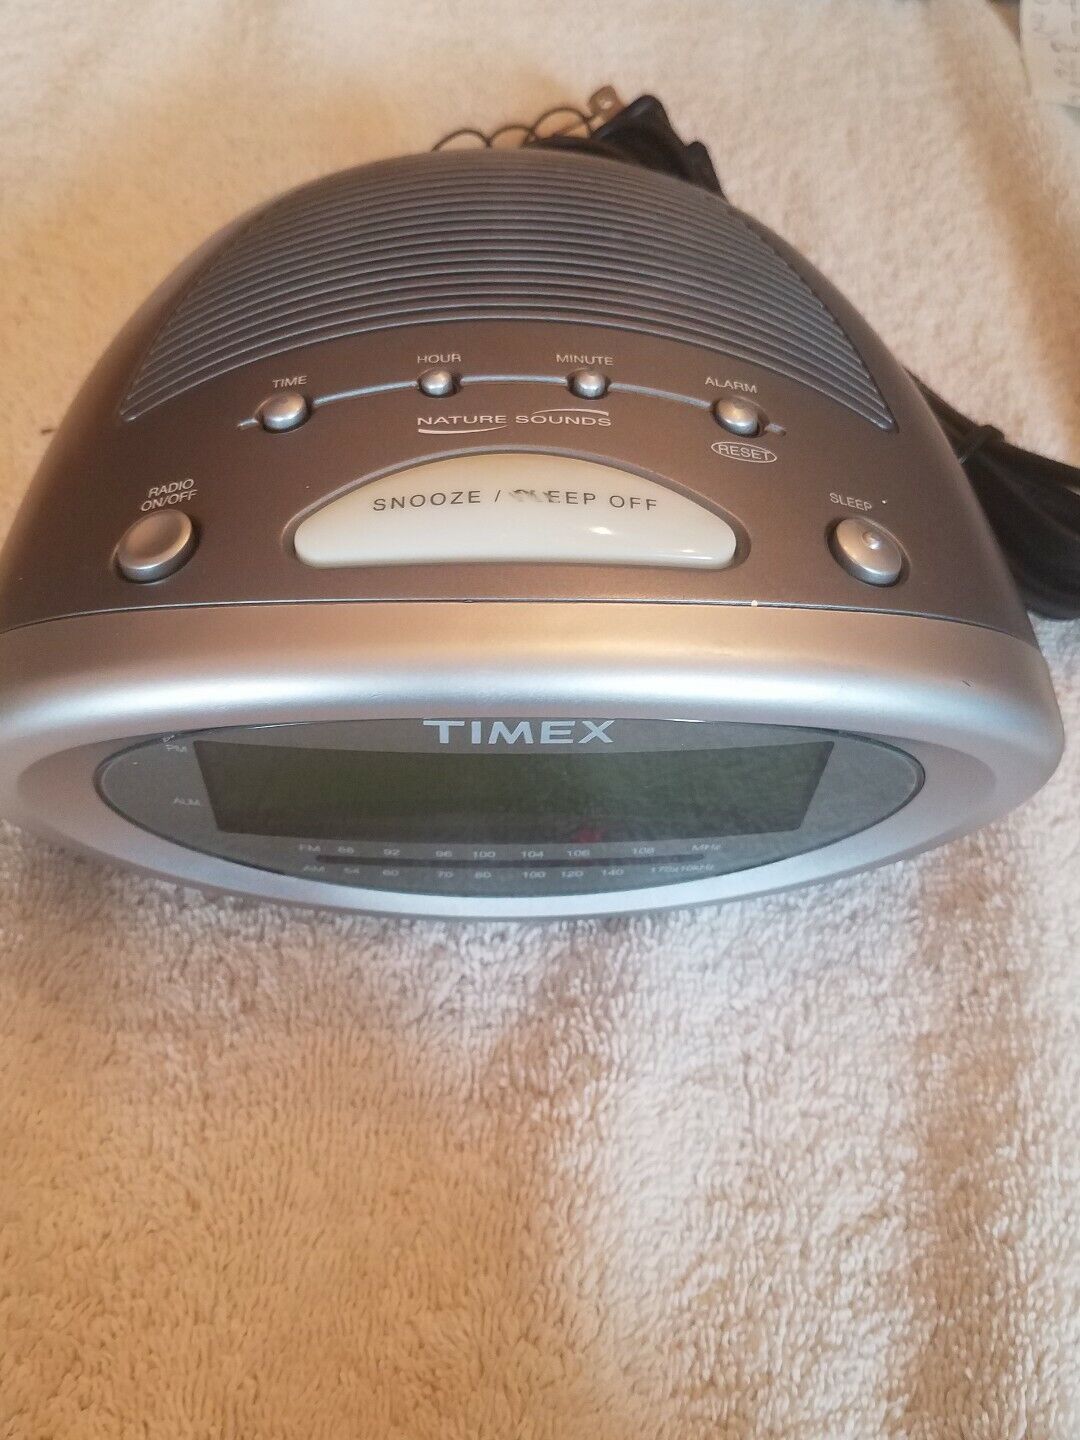 Timex clock radio alarm-Rare Vintage Collectible-SHIPS N 24 HOURS - $138.48